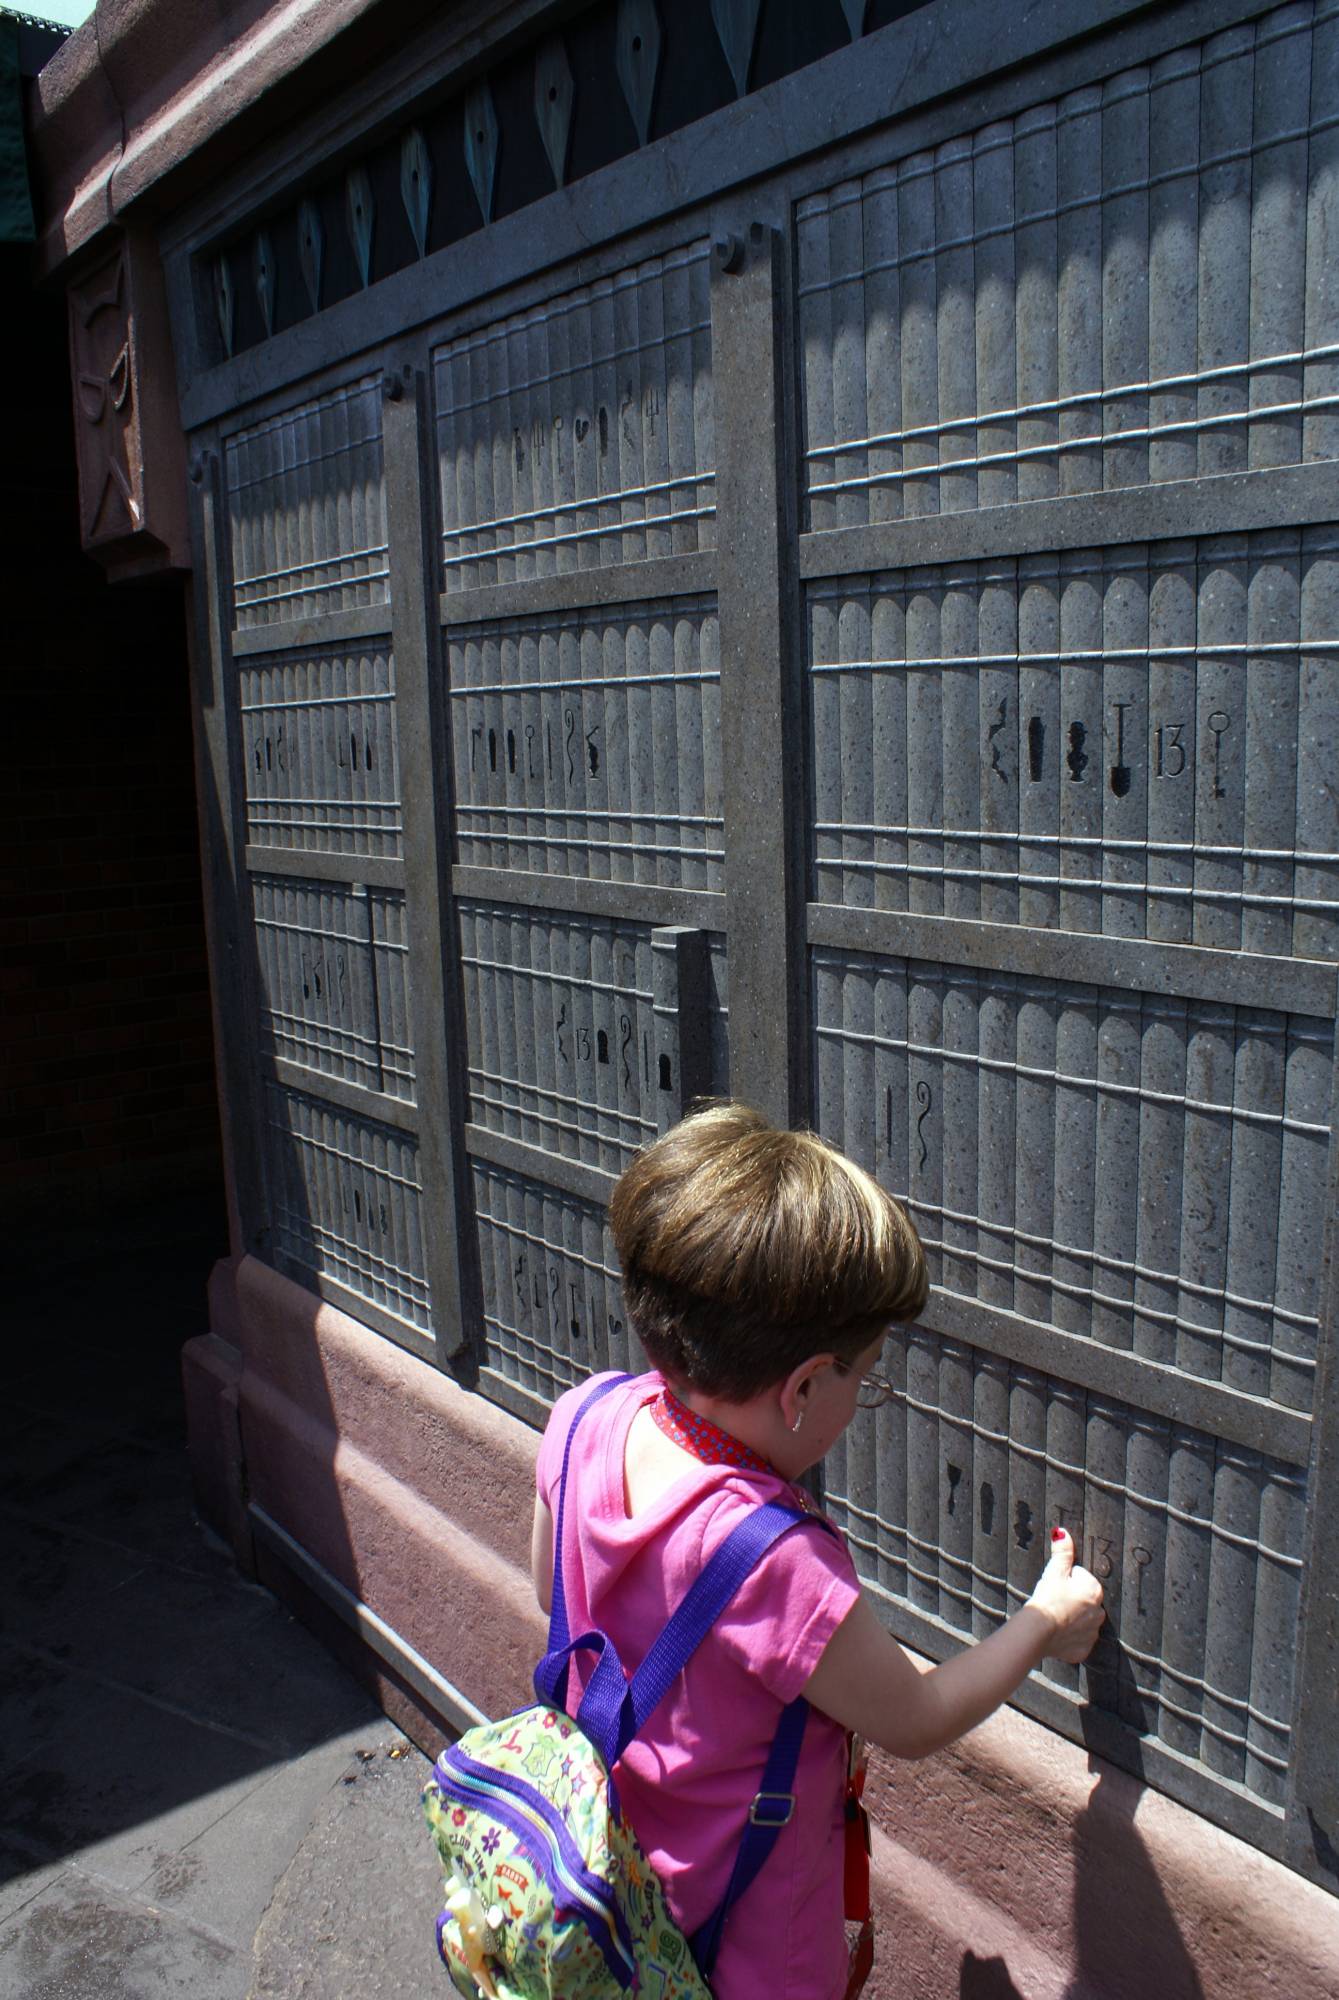 Stefanie playing with Bookshelves in Interactive Queue at Haunted Mansion